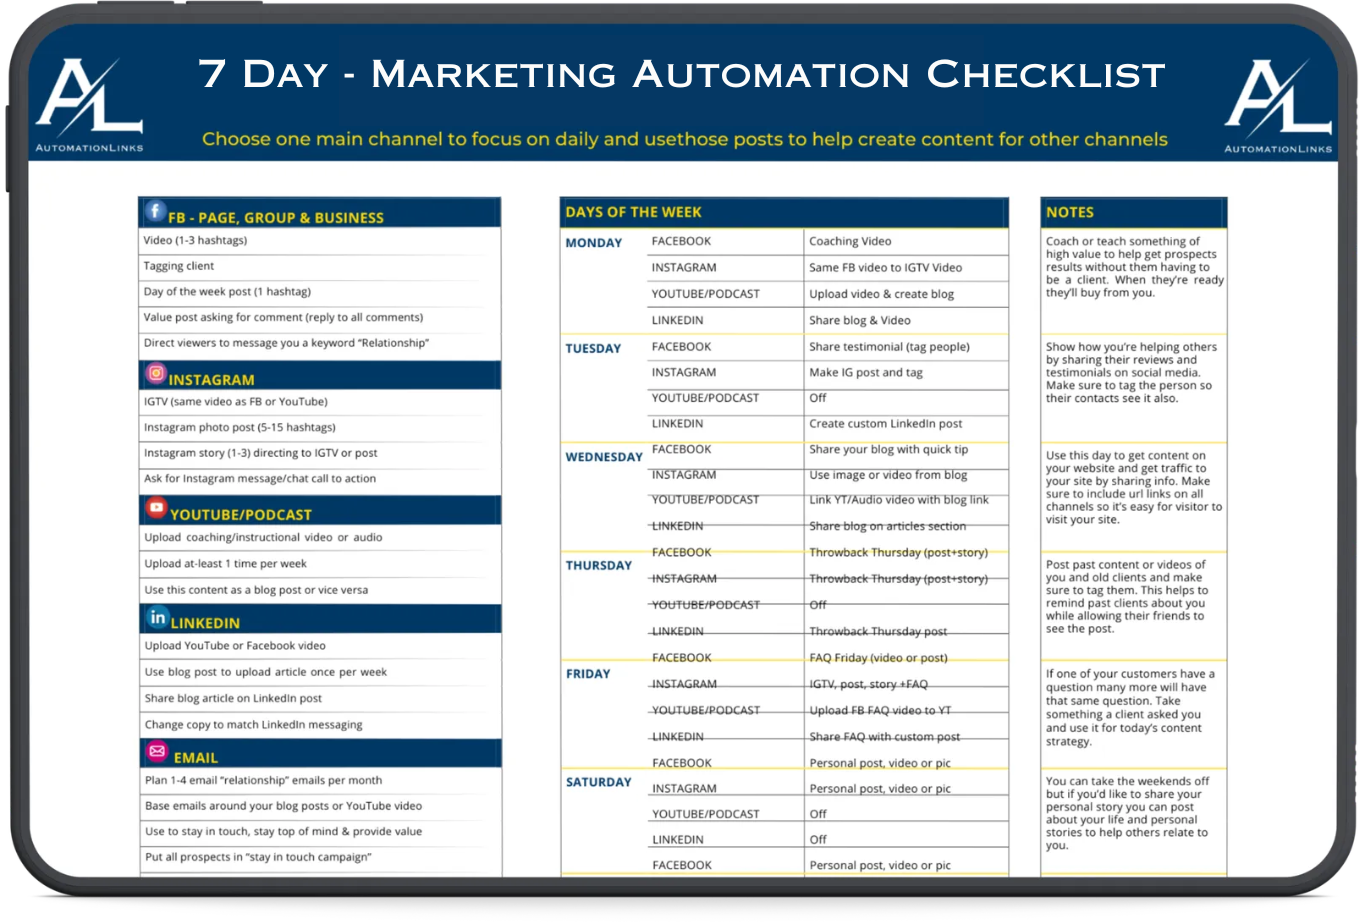 A 7 day marketing automation checklist is displayed on a white background.